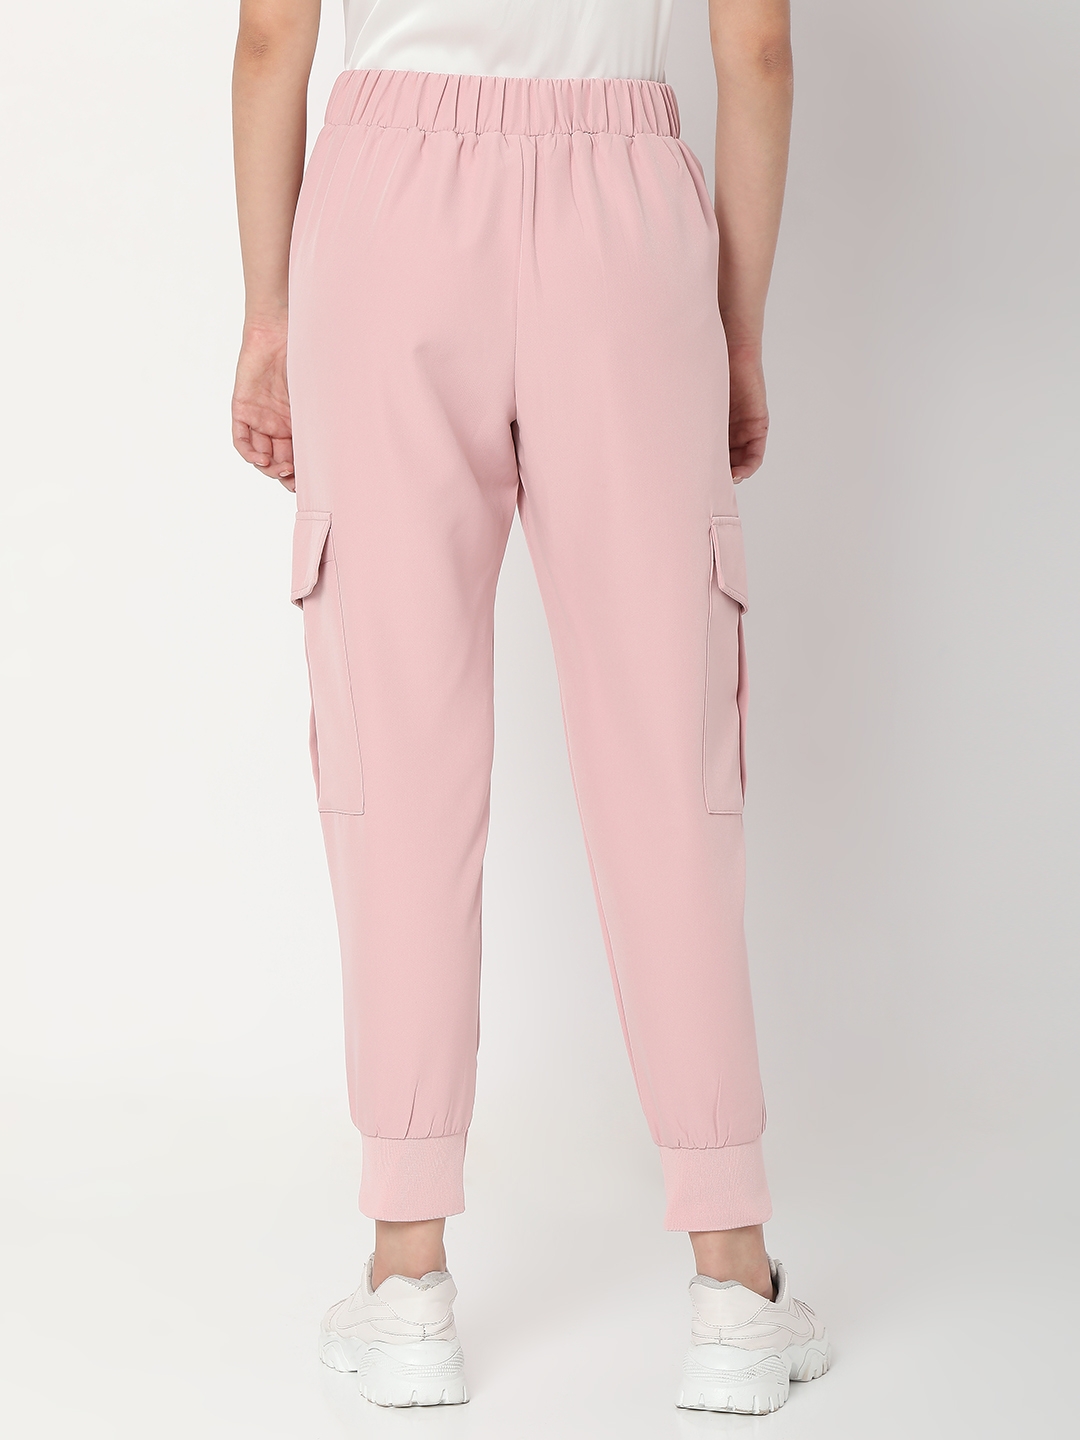 spykar | Women's Pink Cotton Solid Trackpants 3